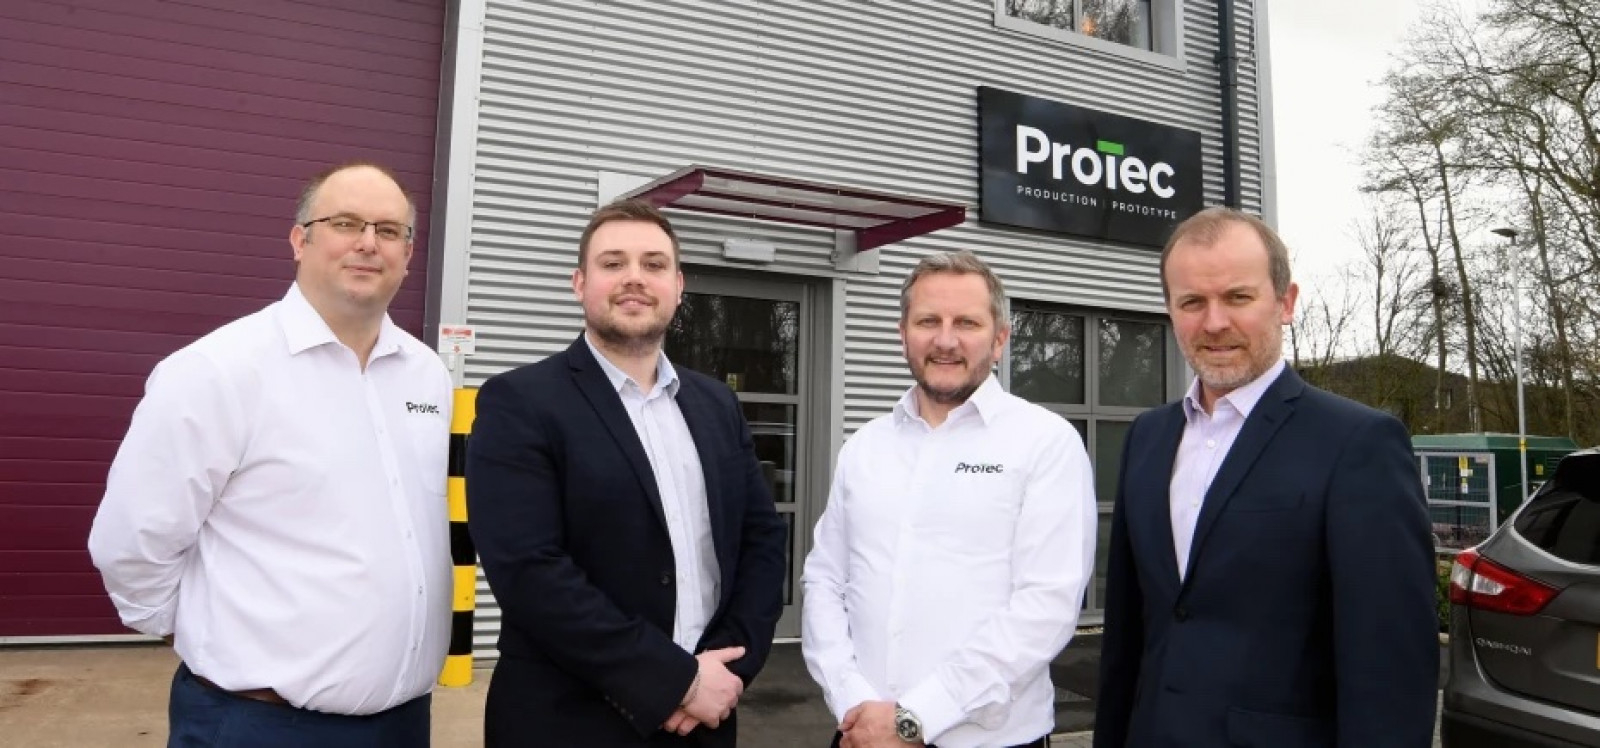 PROTEC creates new jobs and moves site after secur...